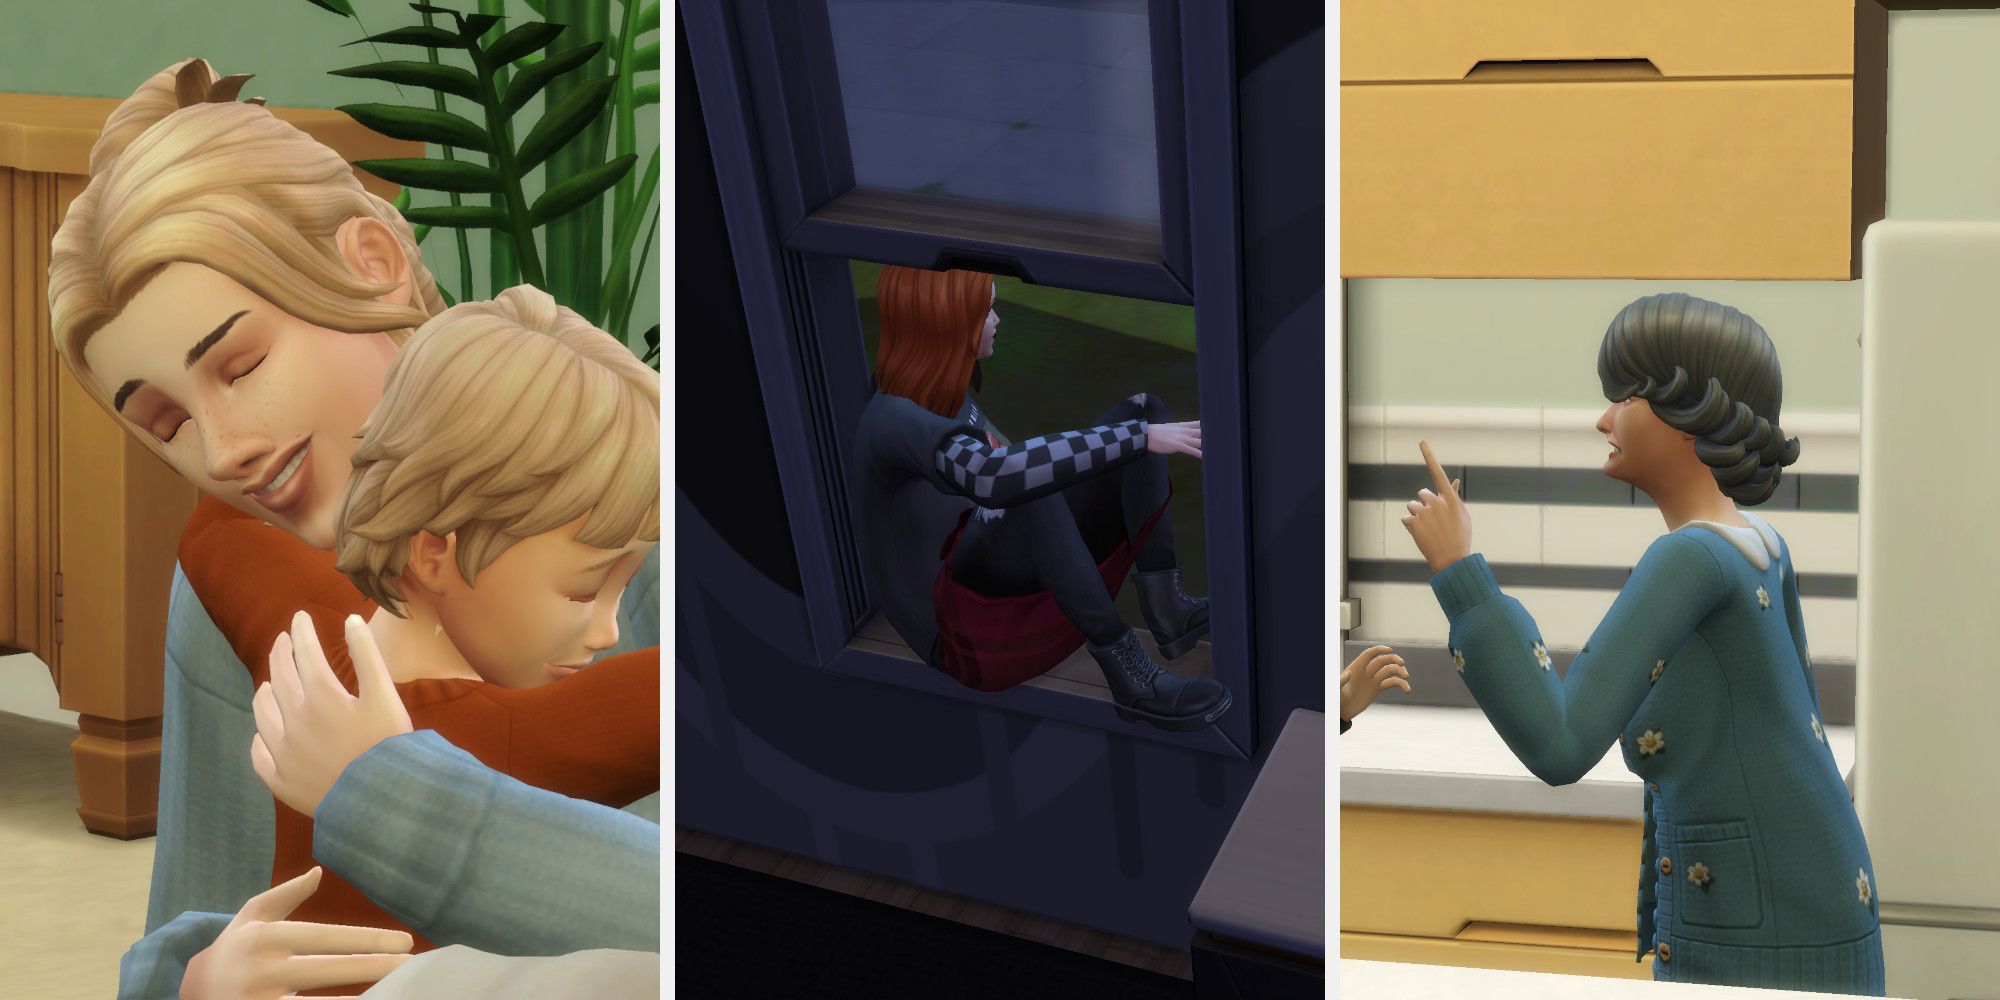 Three images pieced together. First shows two Sims hugging. Second shows a Sim sneaking out of a window. Third shows a Sim yelling.